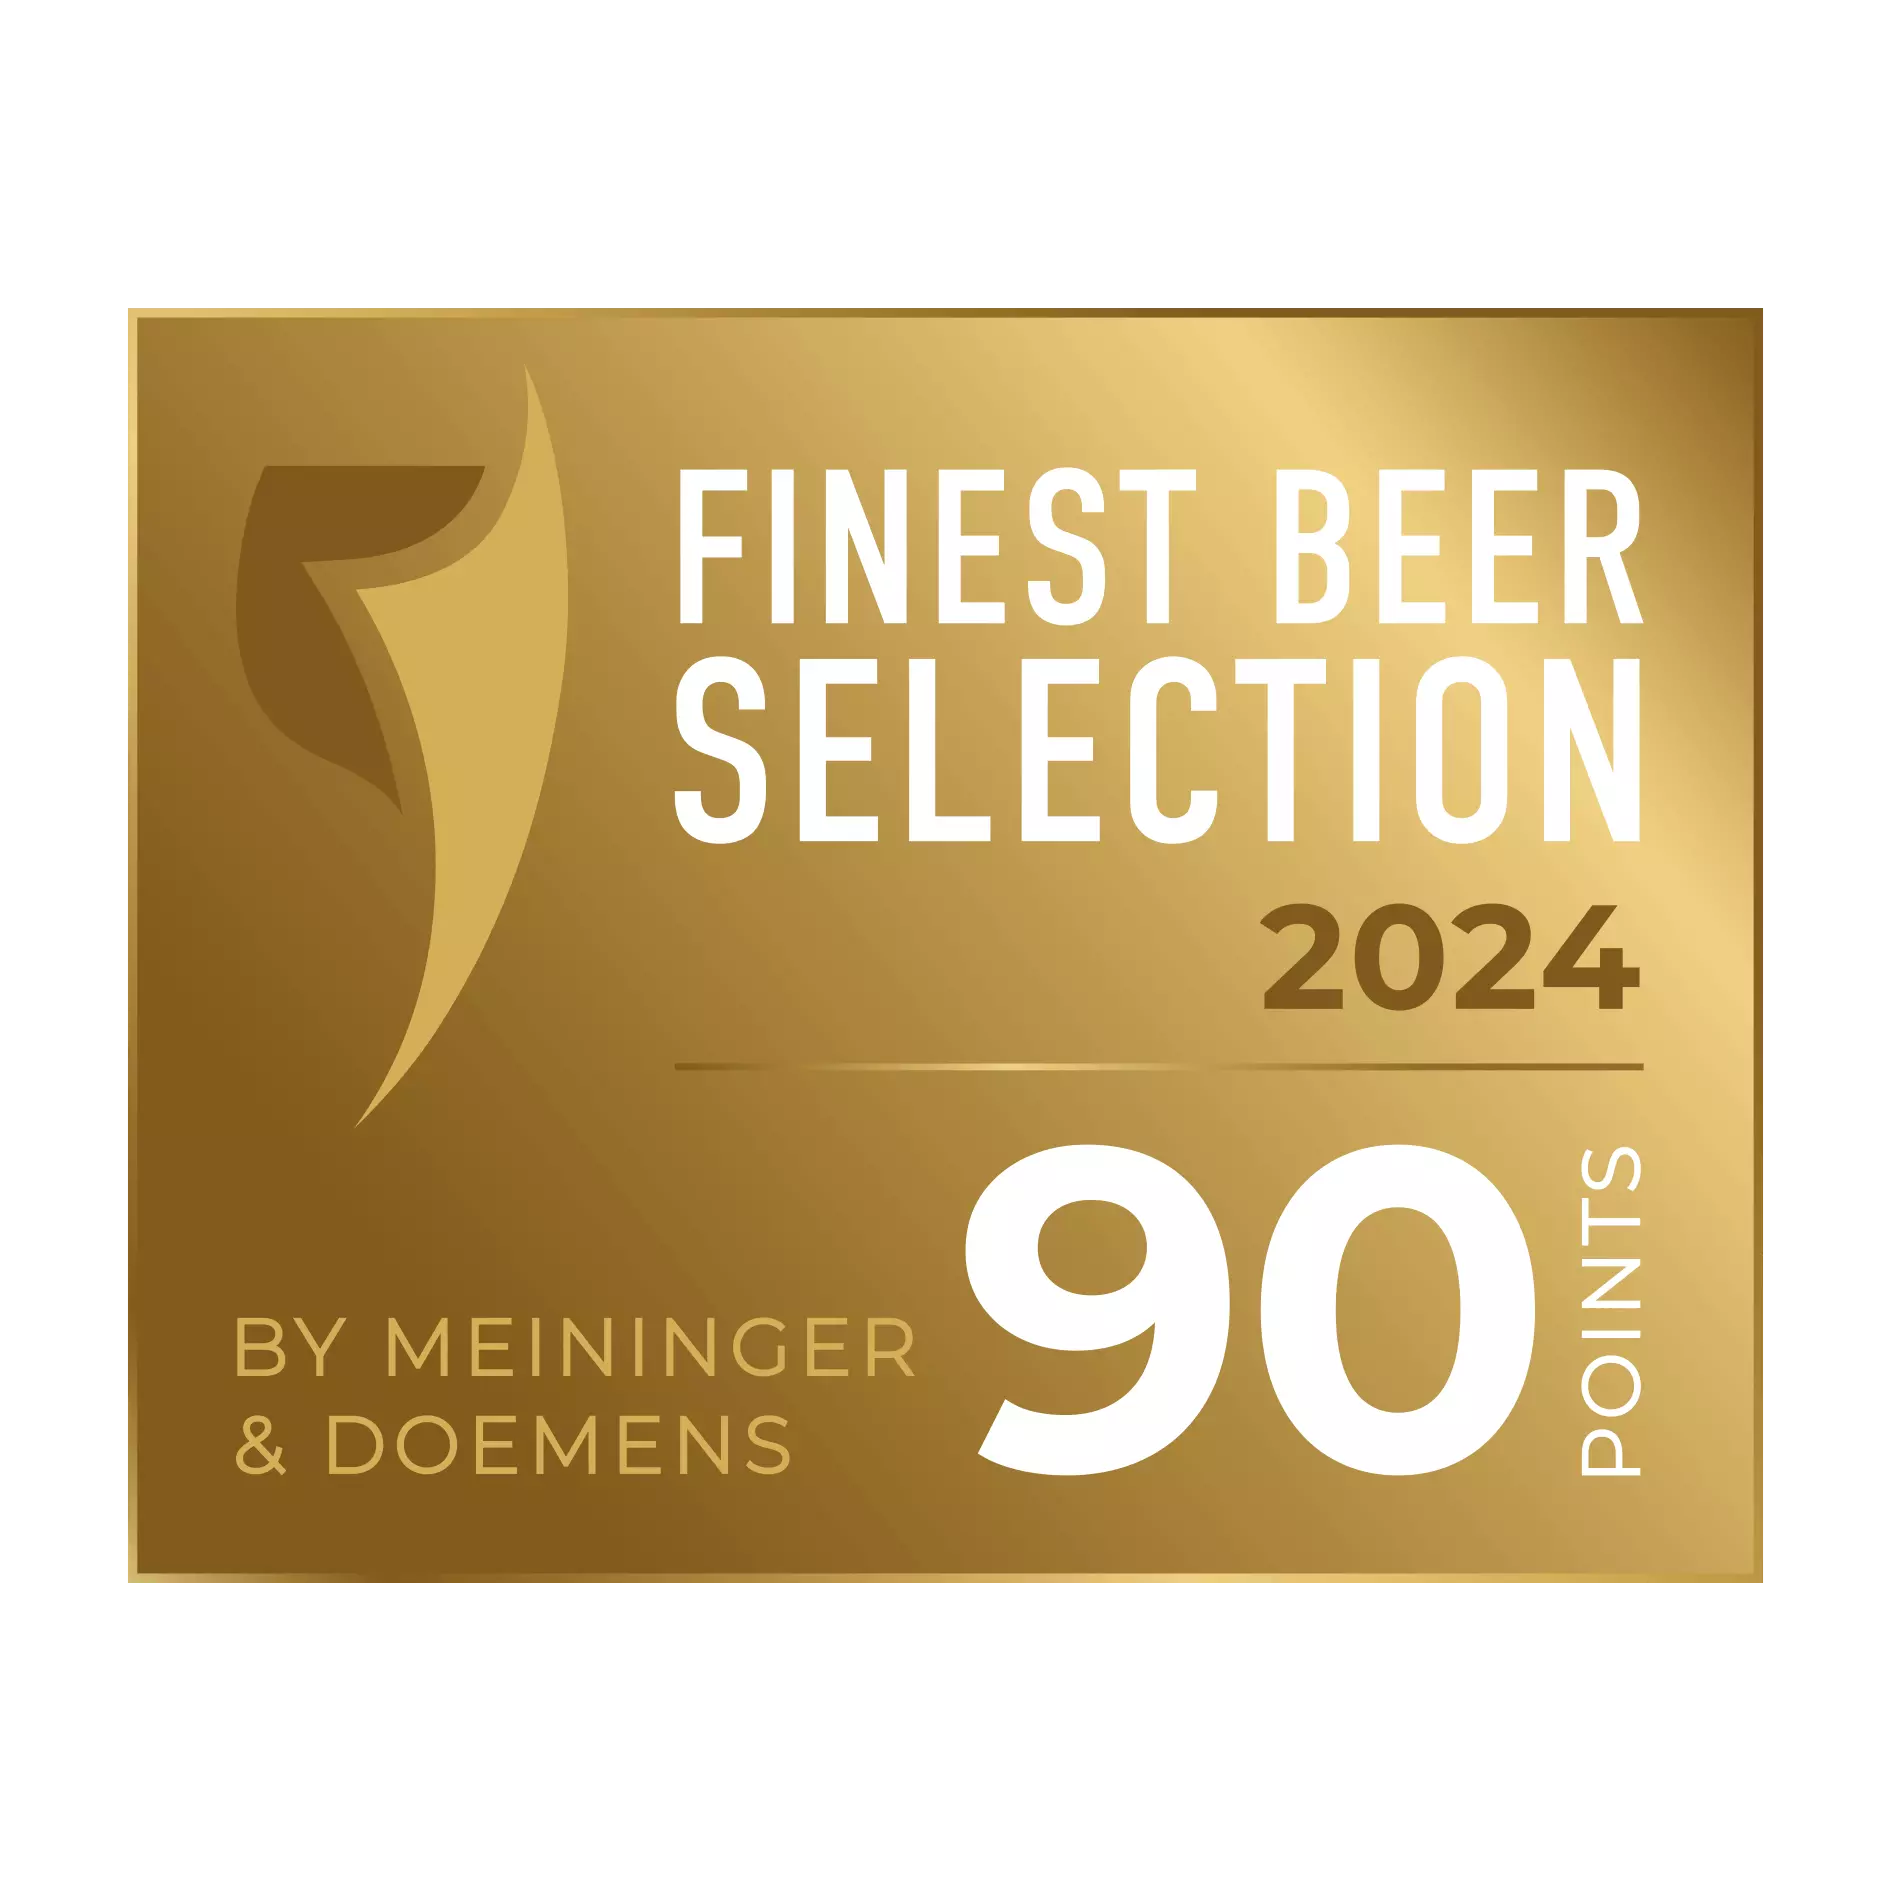 Finest Beer Selection 2024